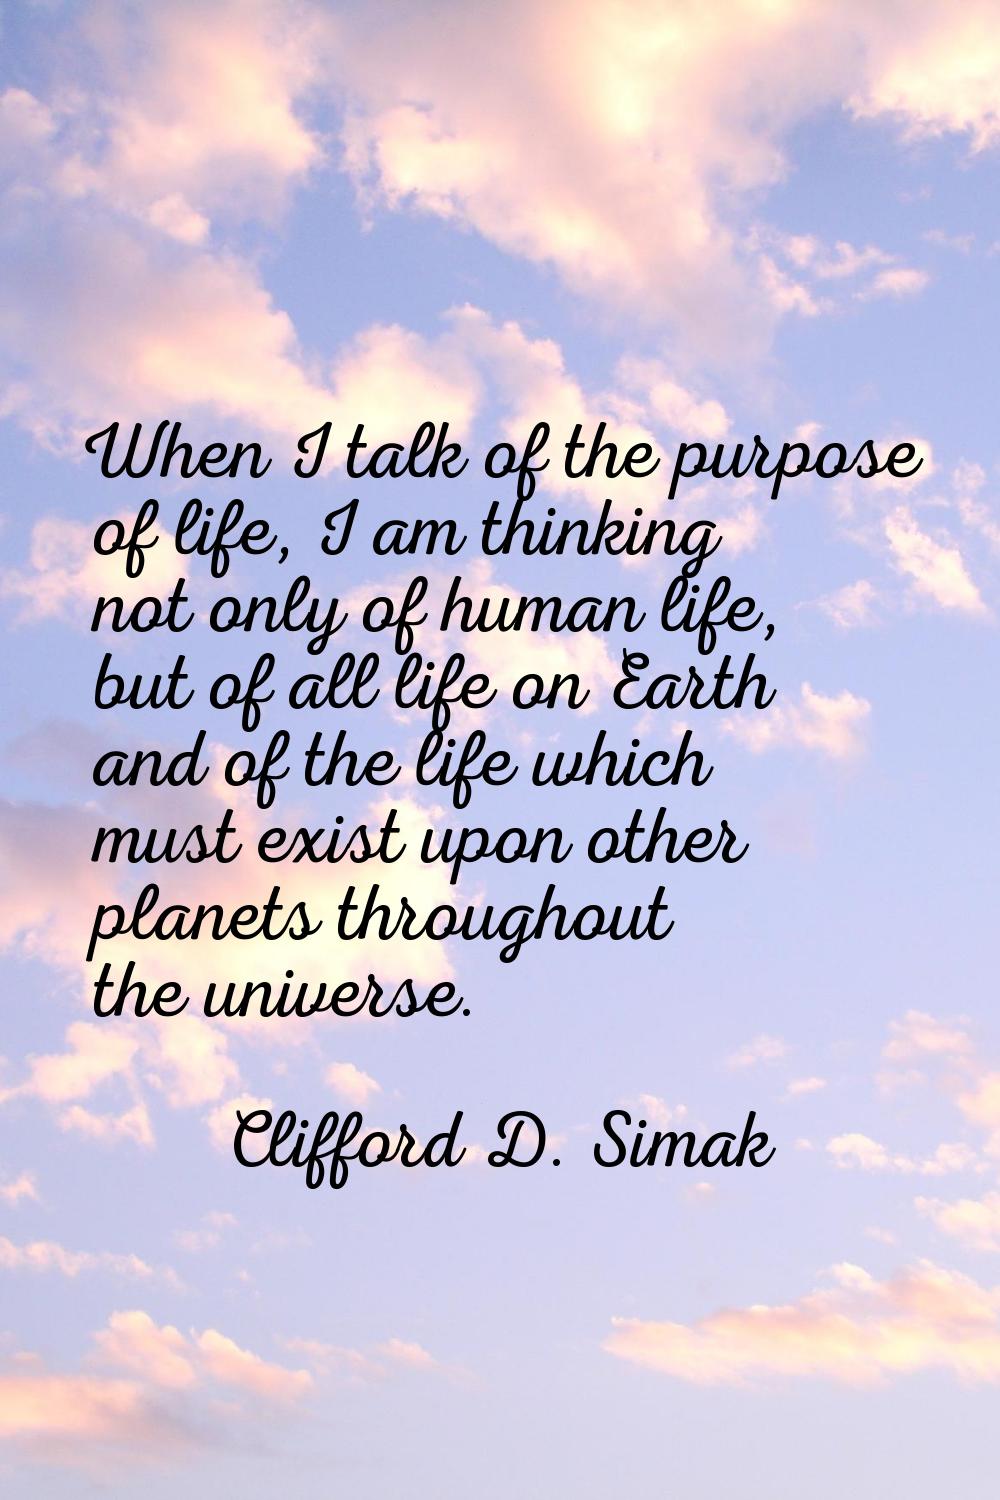 When I talk of the purpose of life, I am thinking not only of human life, but of all life on Earth 